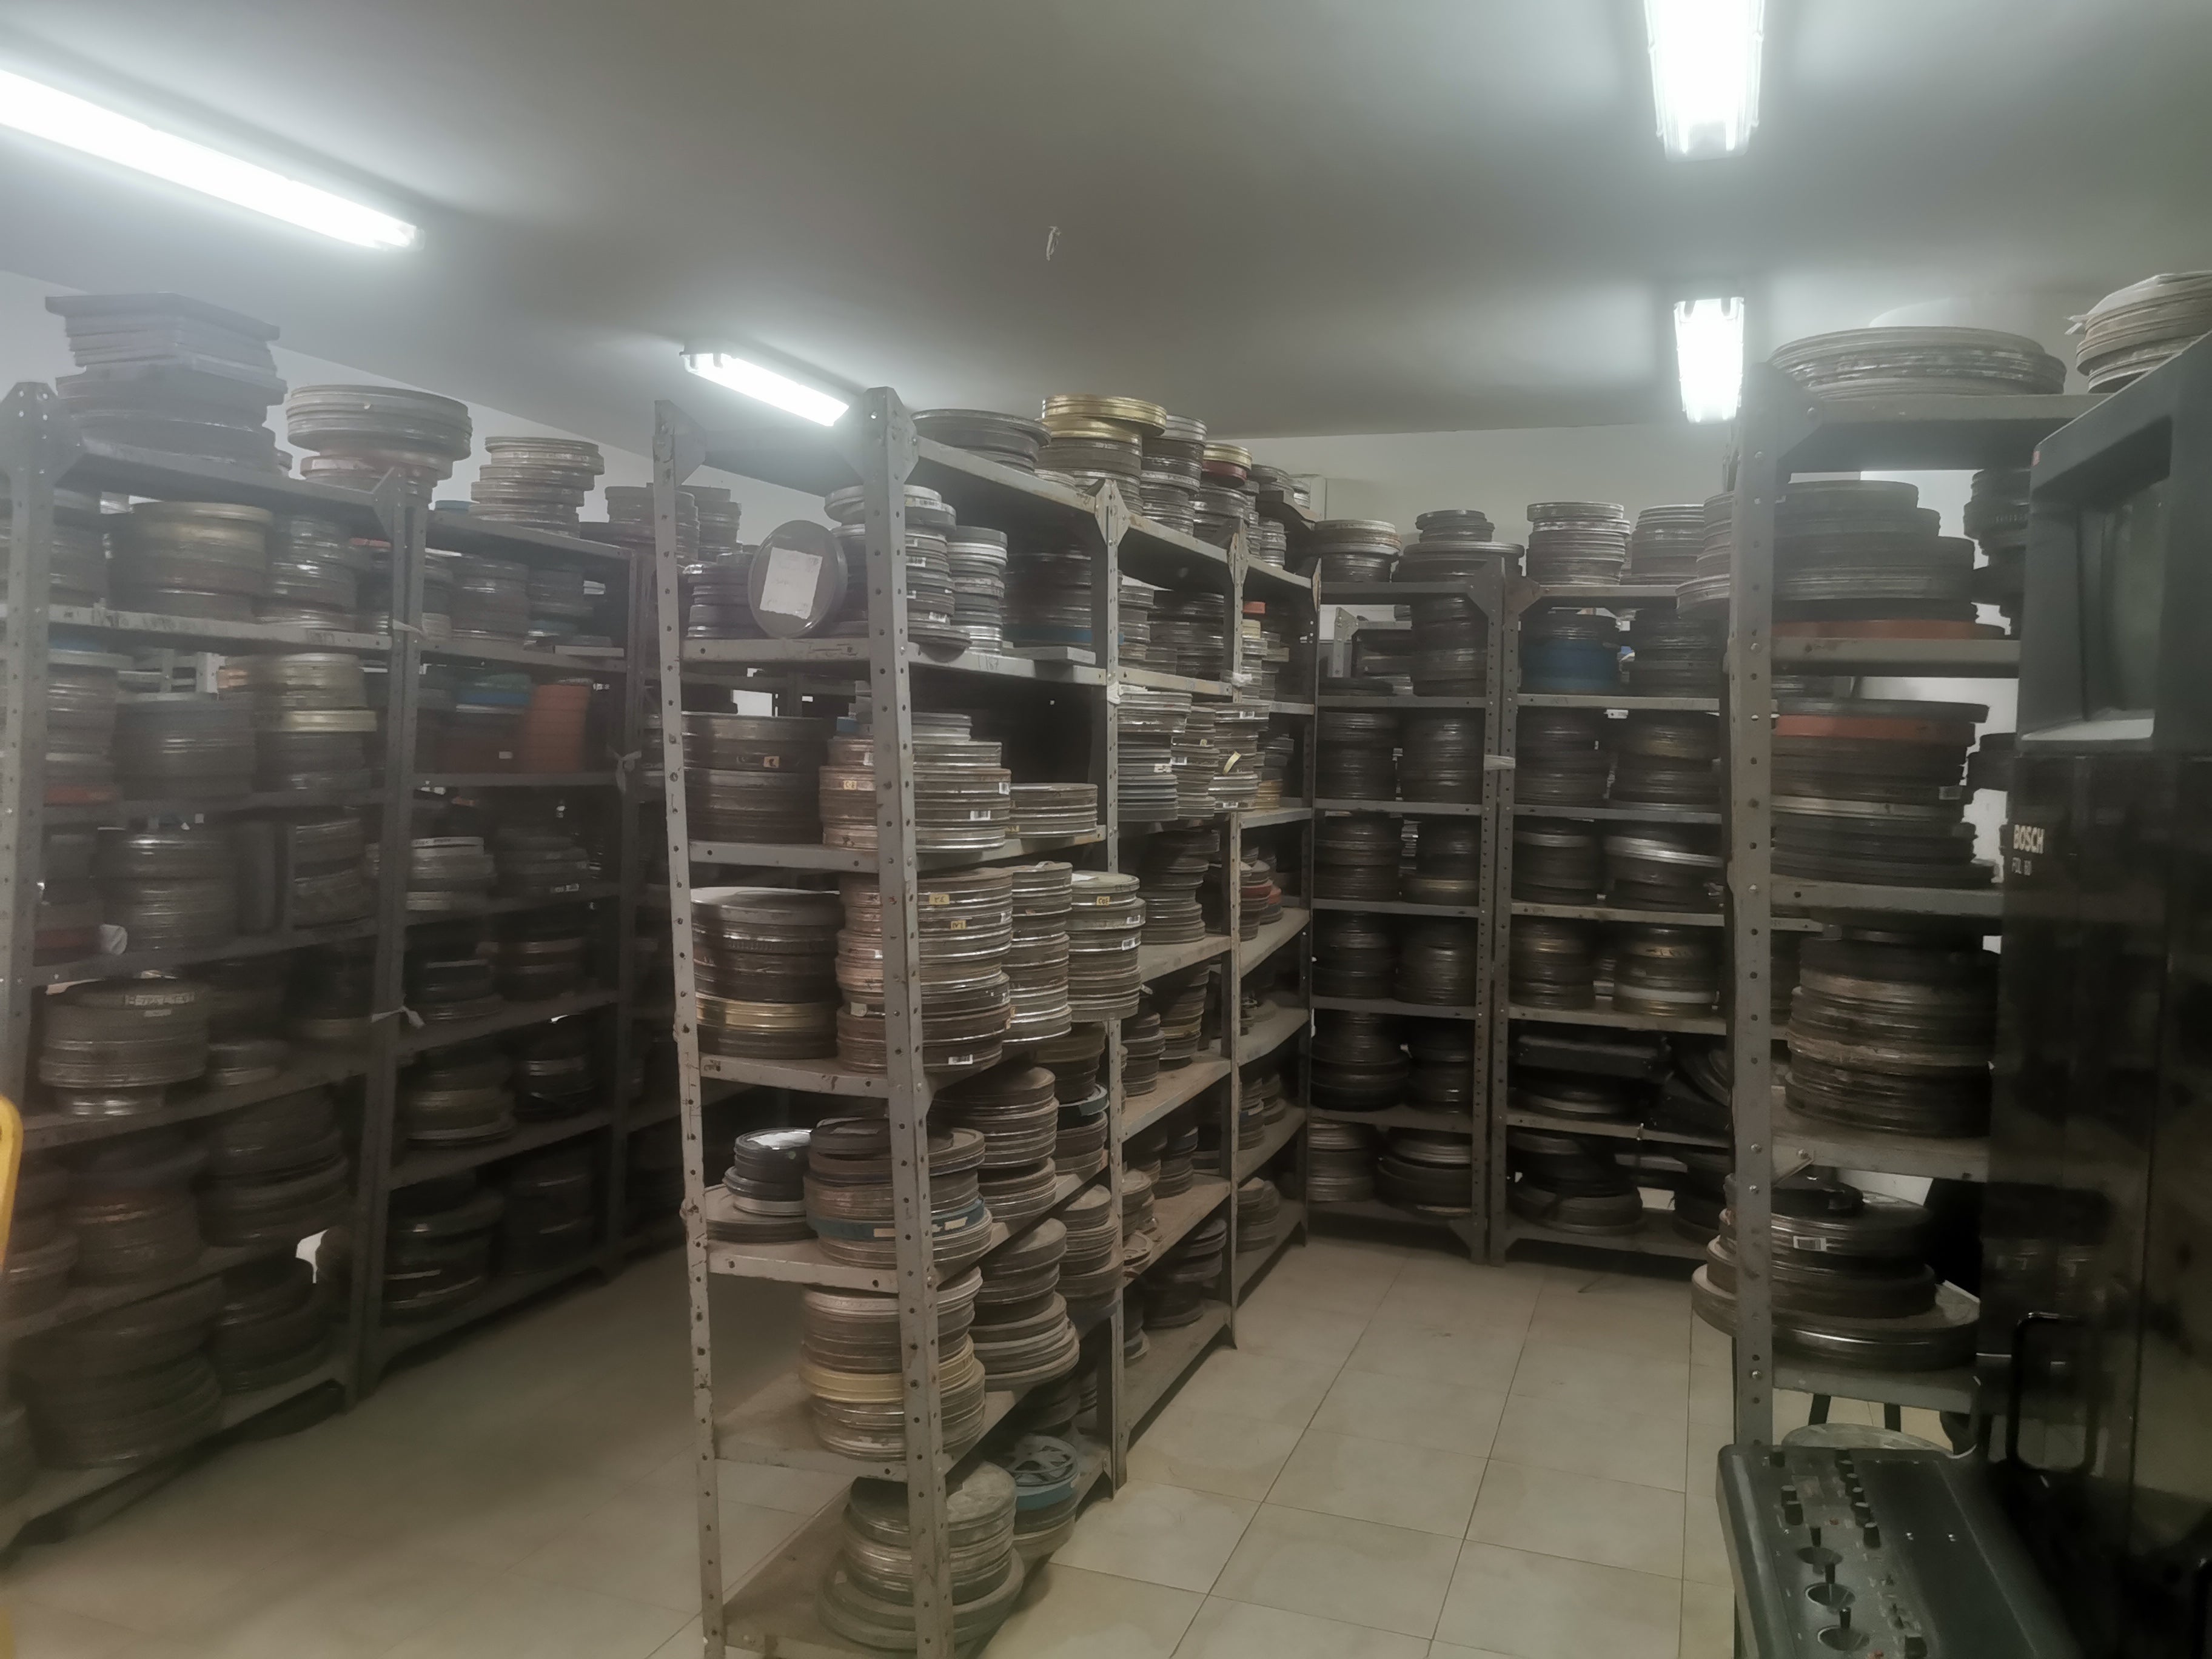 So far, 2,500 documentary films that were made as far back as 1940 have been scanned as part of Sudan Memory’s Sudan Film Archive digitisation project - but there are fears this archive could be blown up